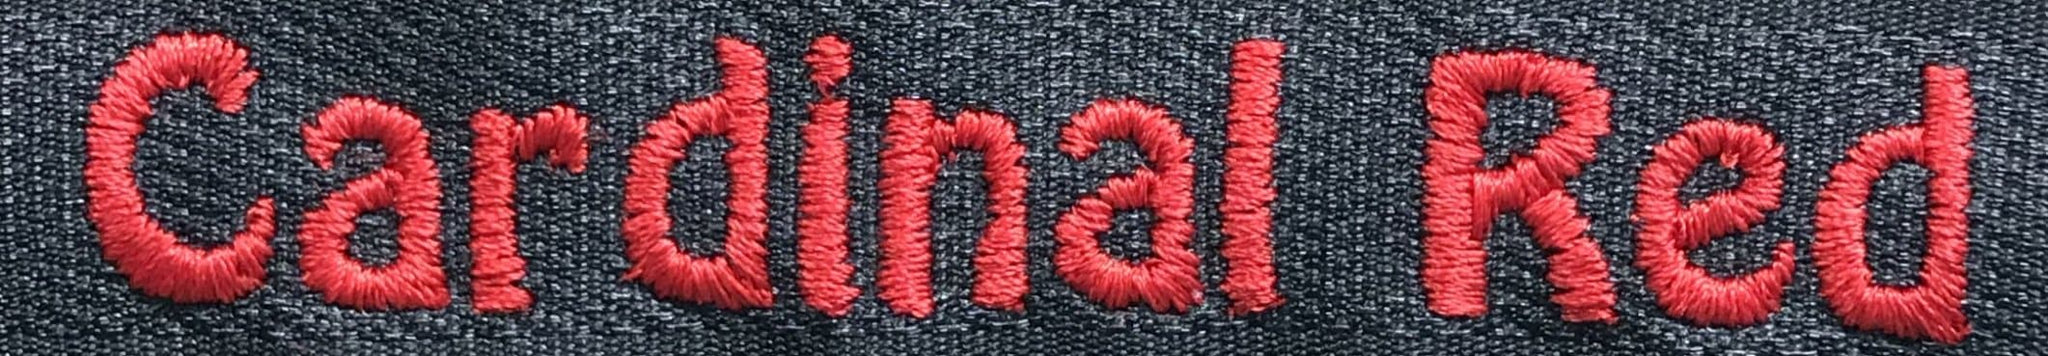 example of embroidery in cardinal red